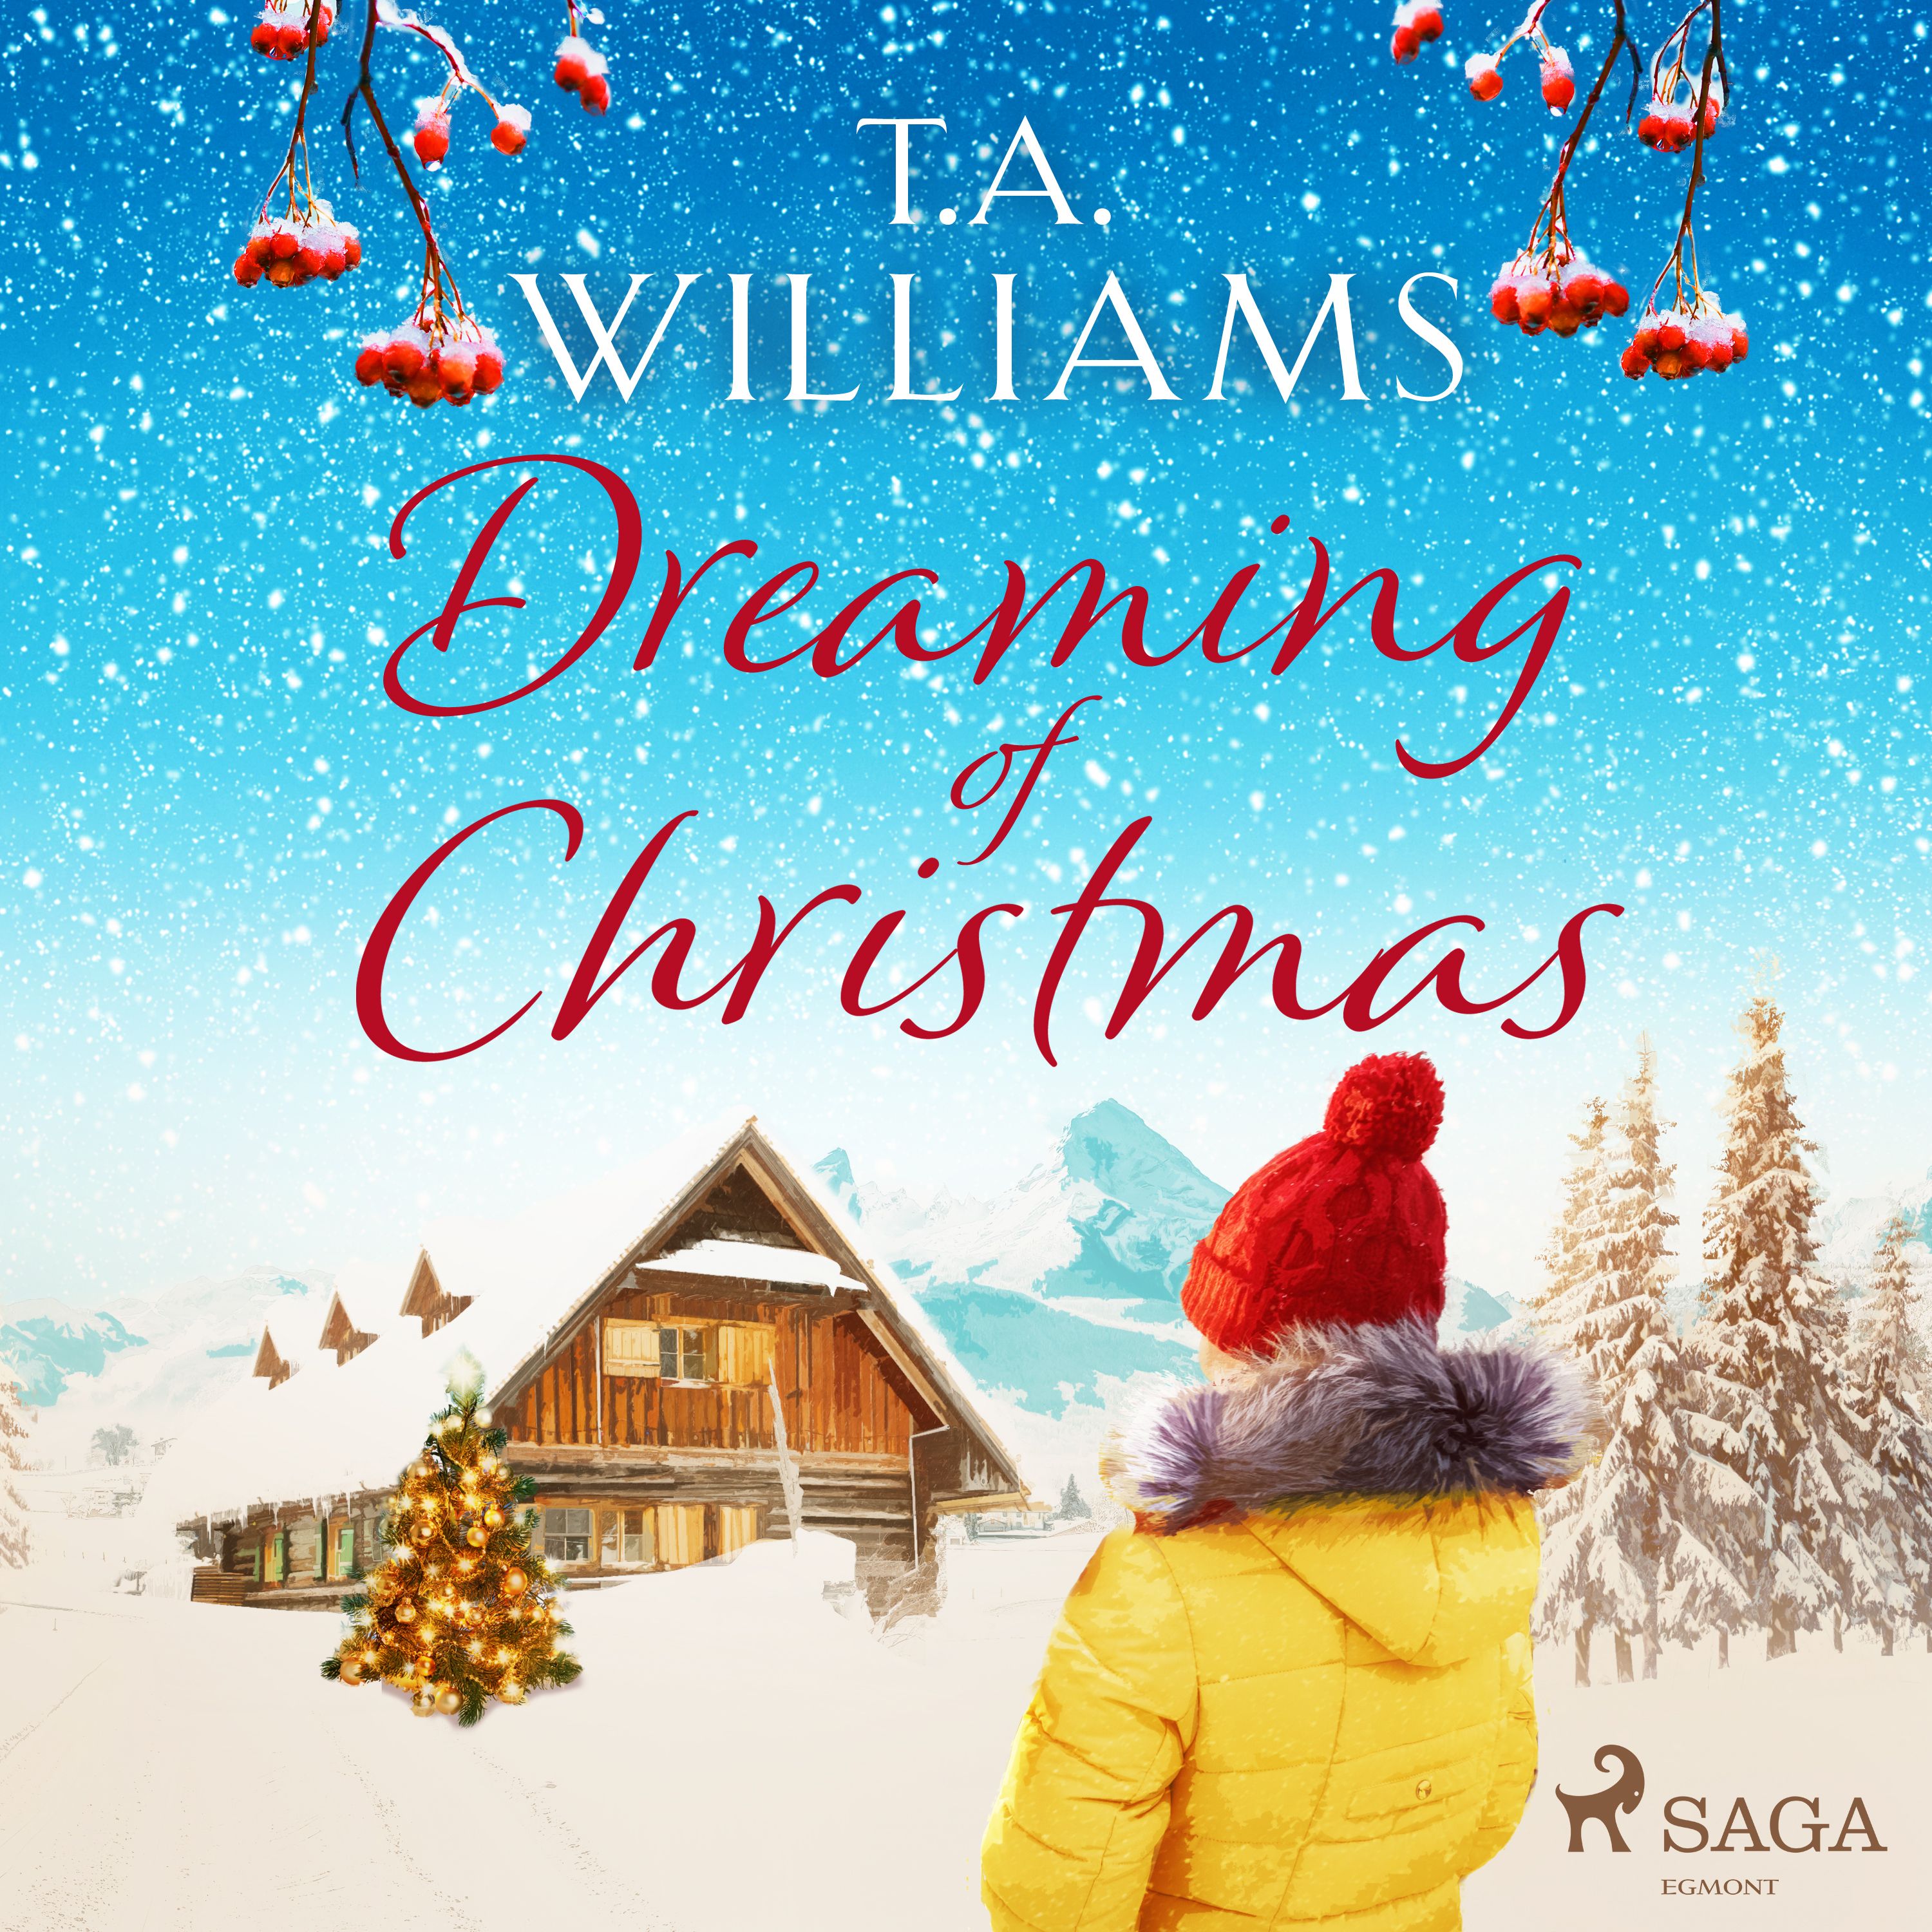 Dreaming of Christmas, lydbog af T.A. Williams